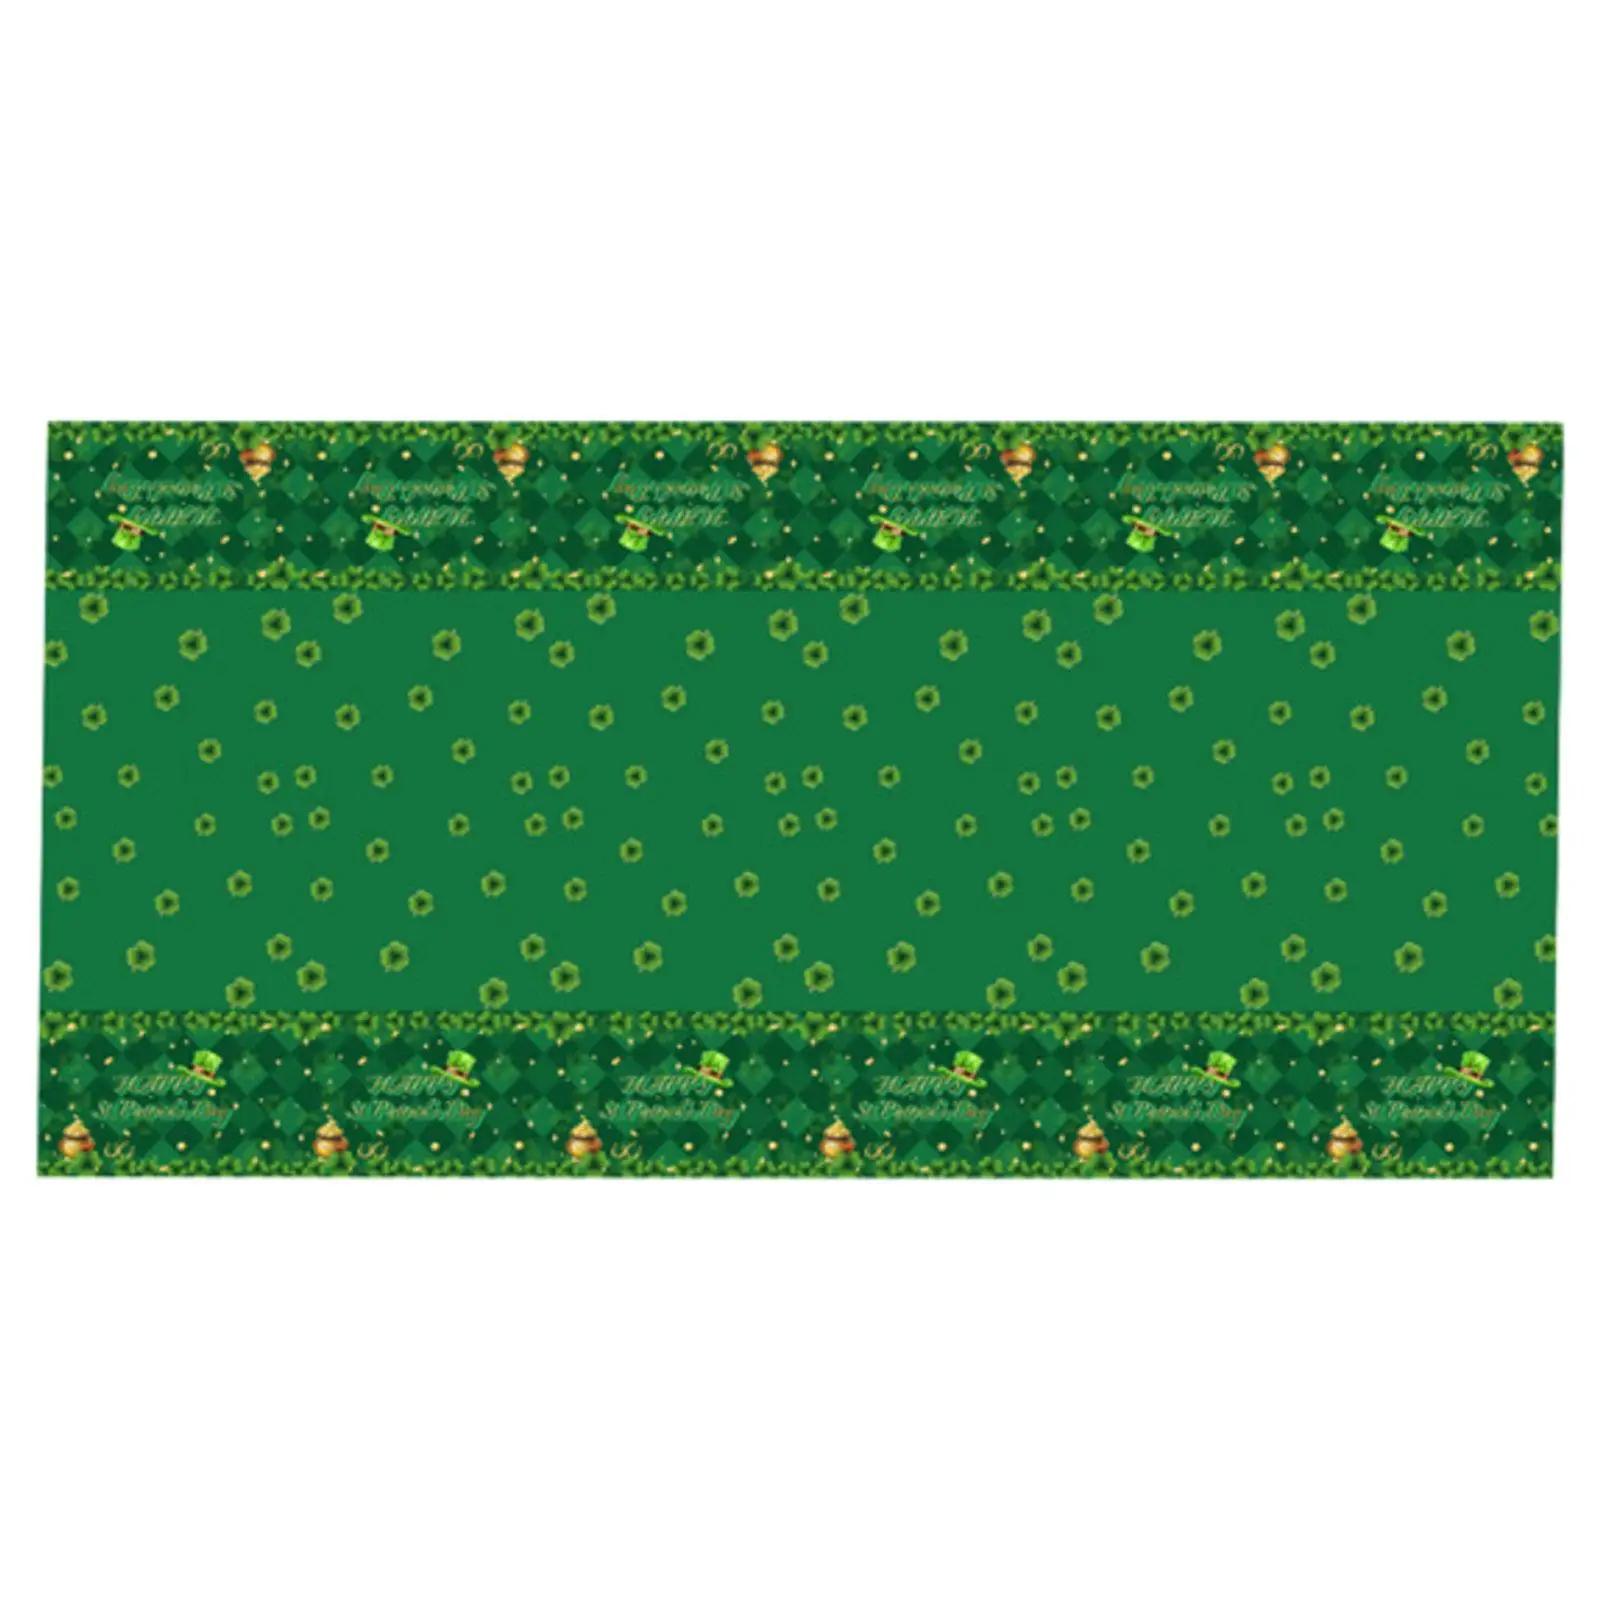 

ST. Patrick's Day Tablecloth Shamrock Waterproof Decorative Table Cloth for Banquet Dinner Table Celebration Farmhouse Festival